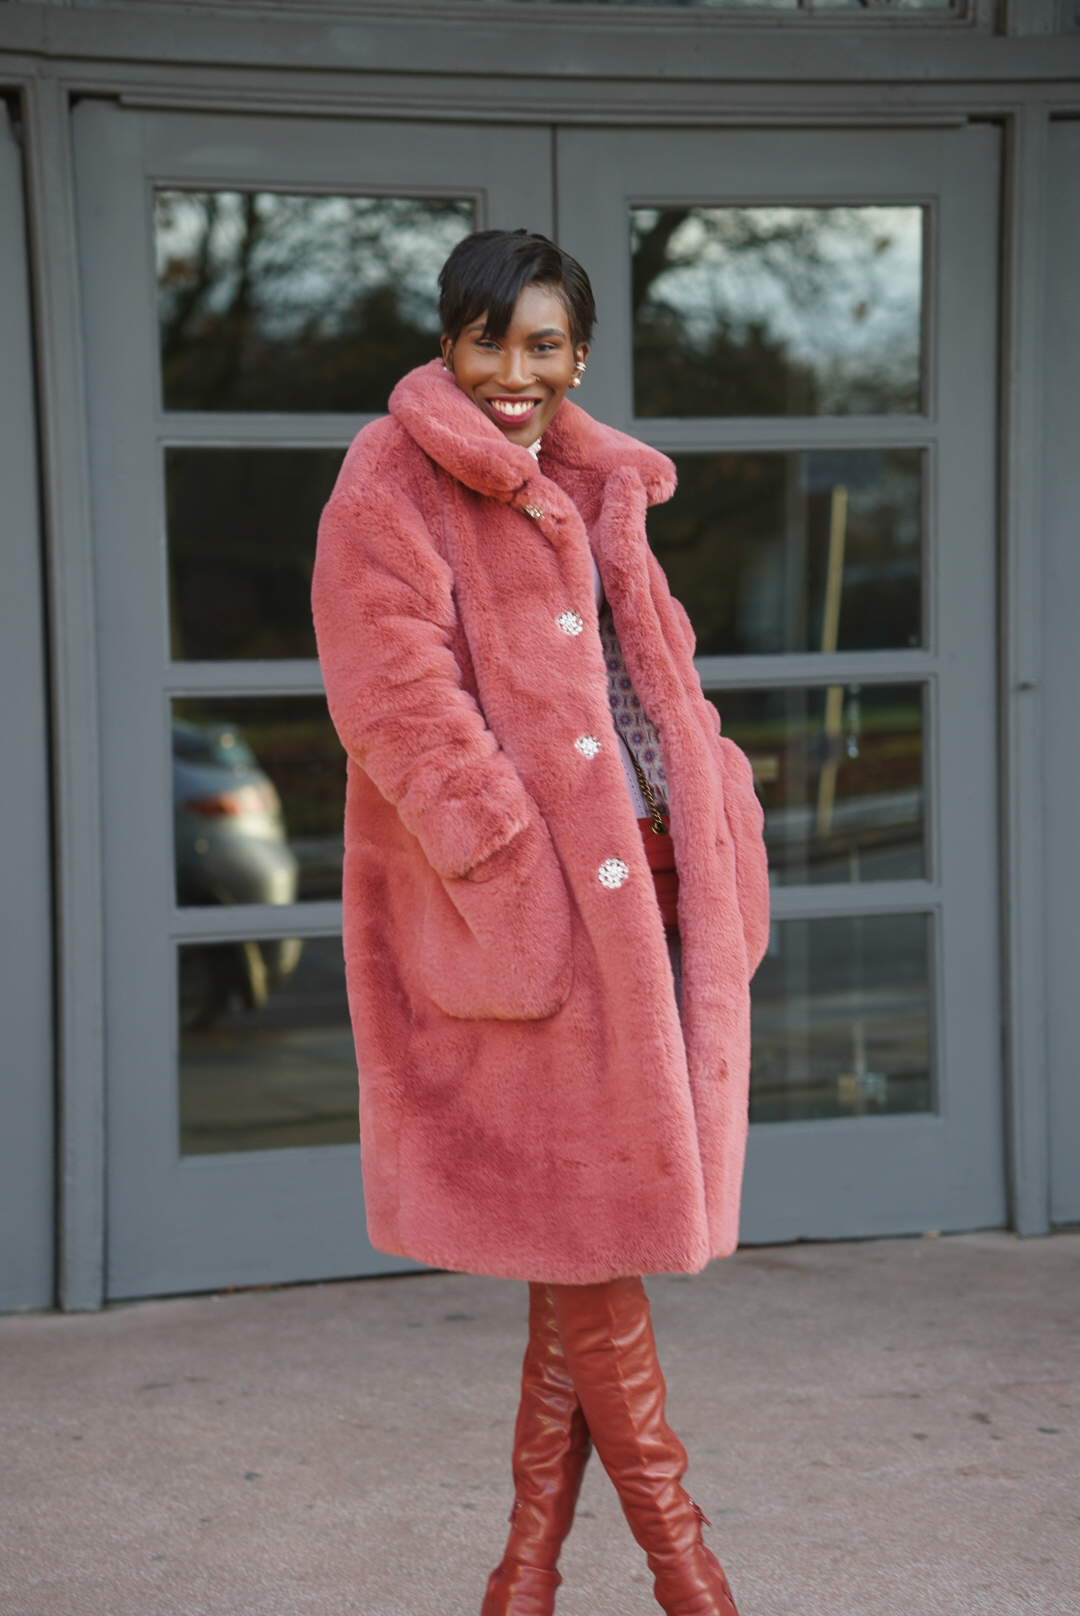 The Teddy Coat You Need To Stay Chic